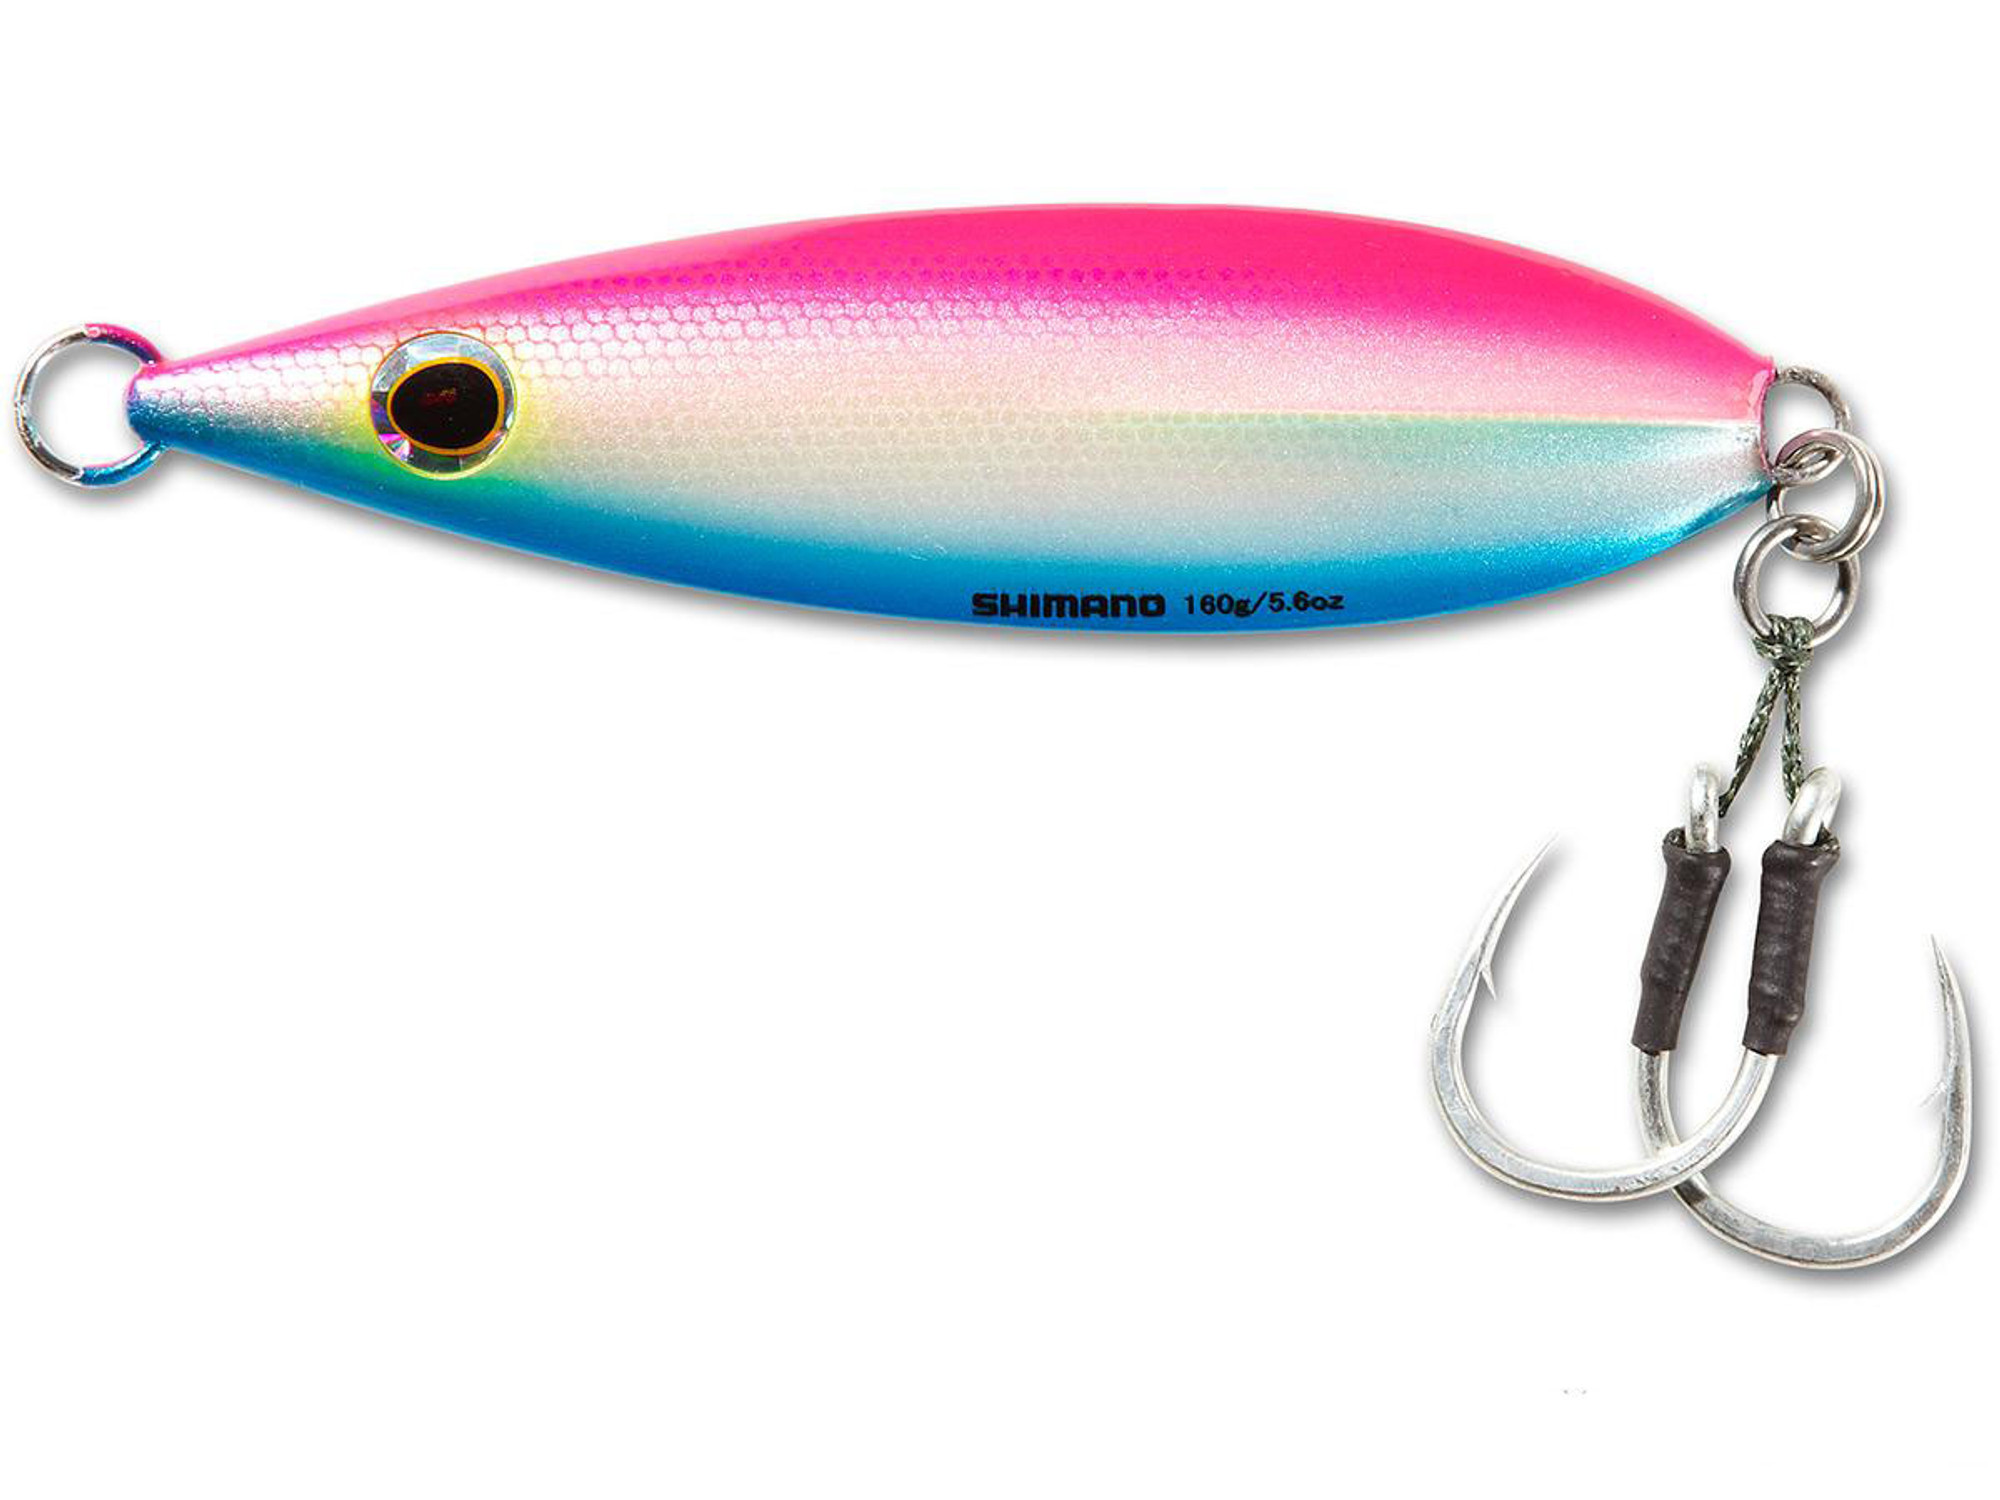 Shimano Butterfly Flat Fall Jig (Color: Pink Blue / 160g)